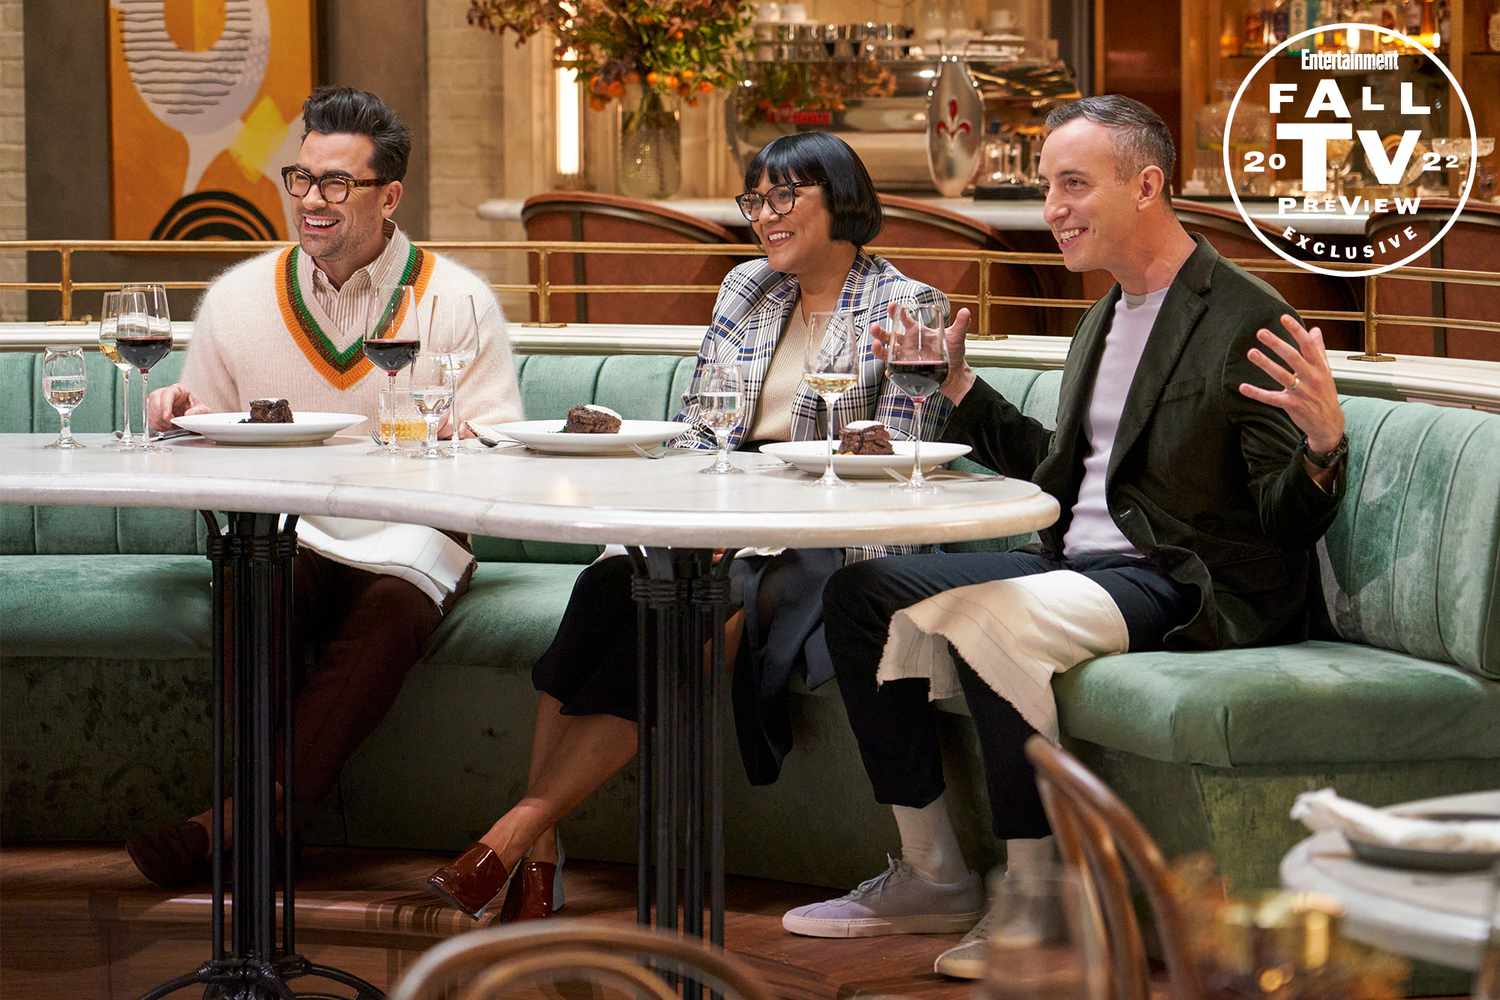 Dan Levy previews his heartwarming new reality show The Big Brunch 